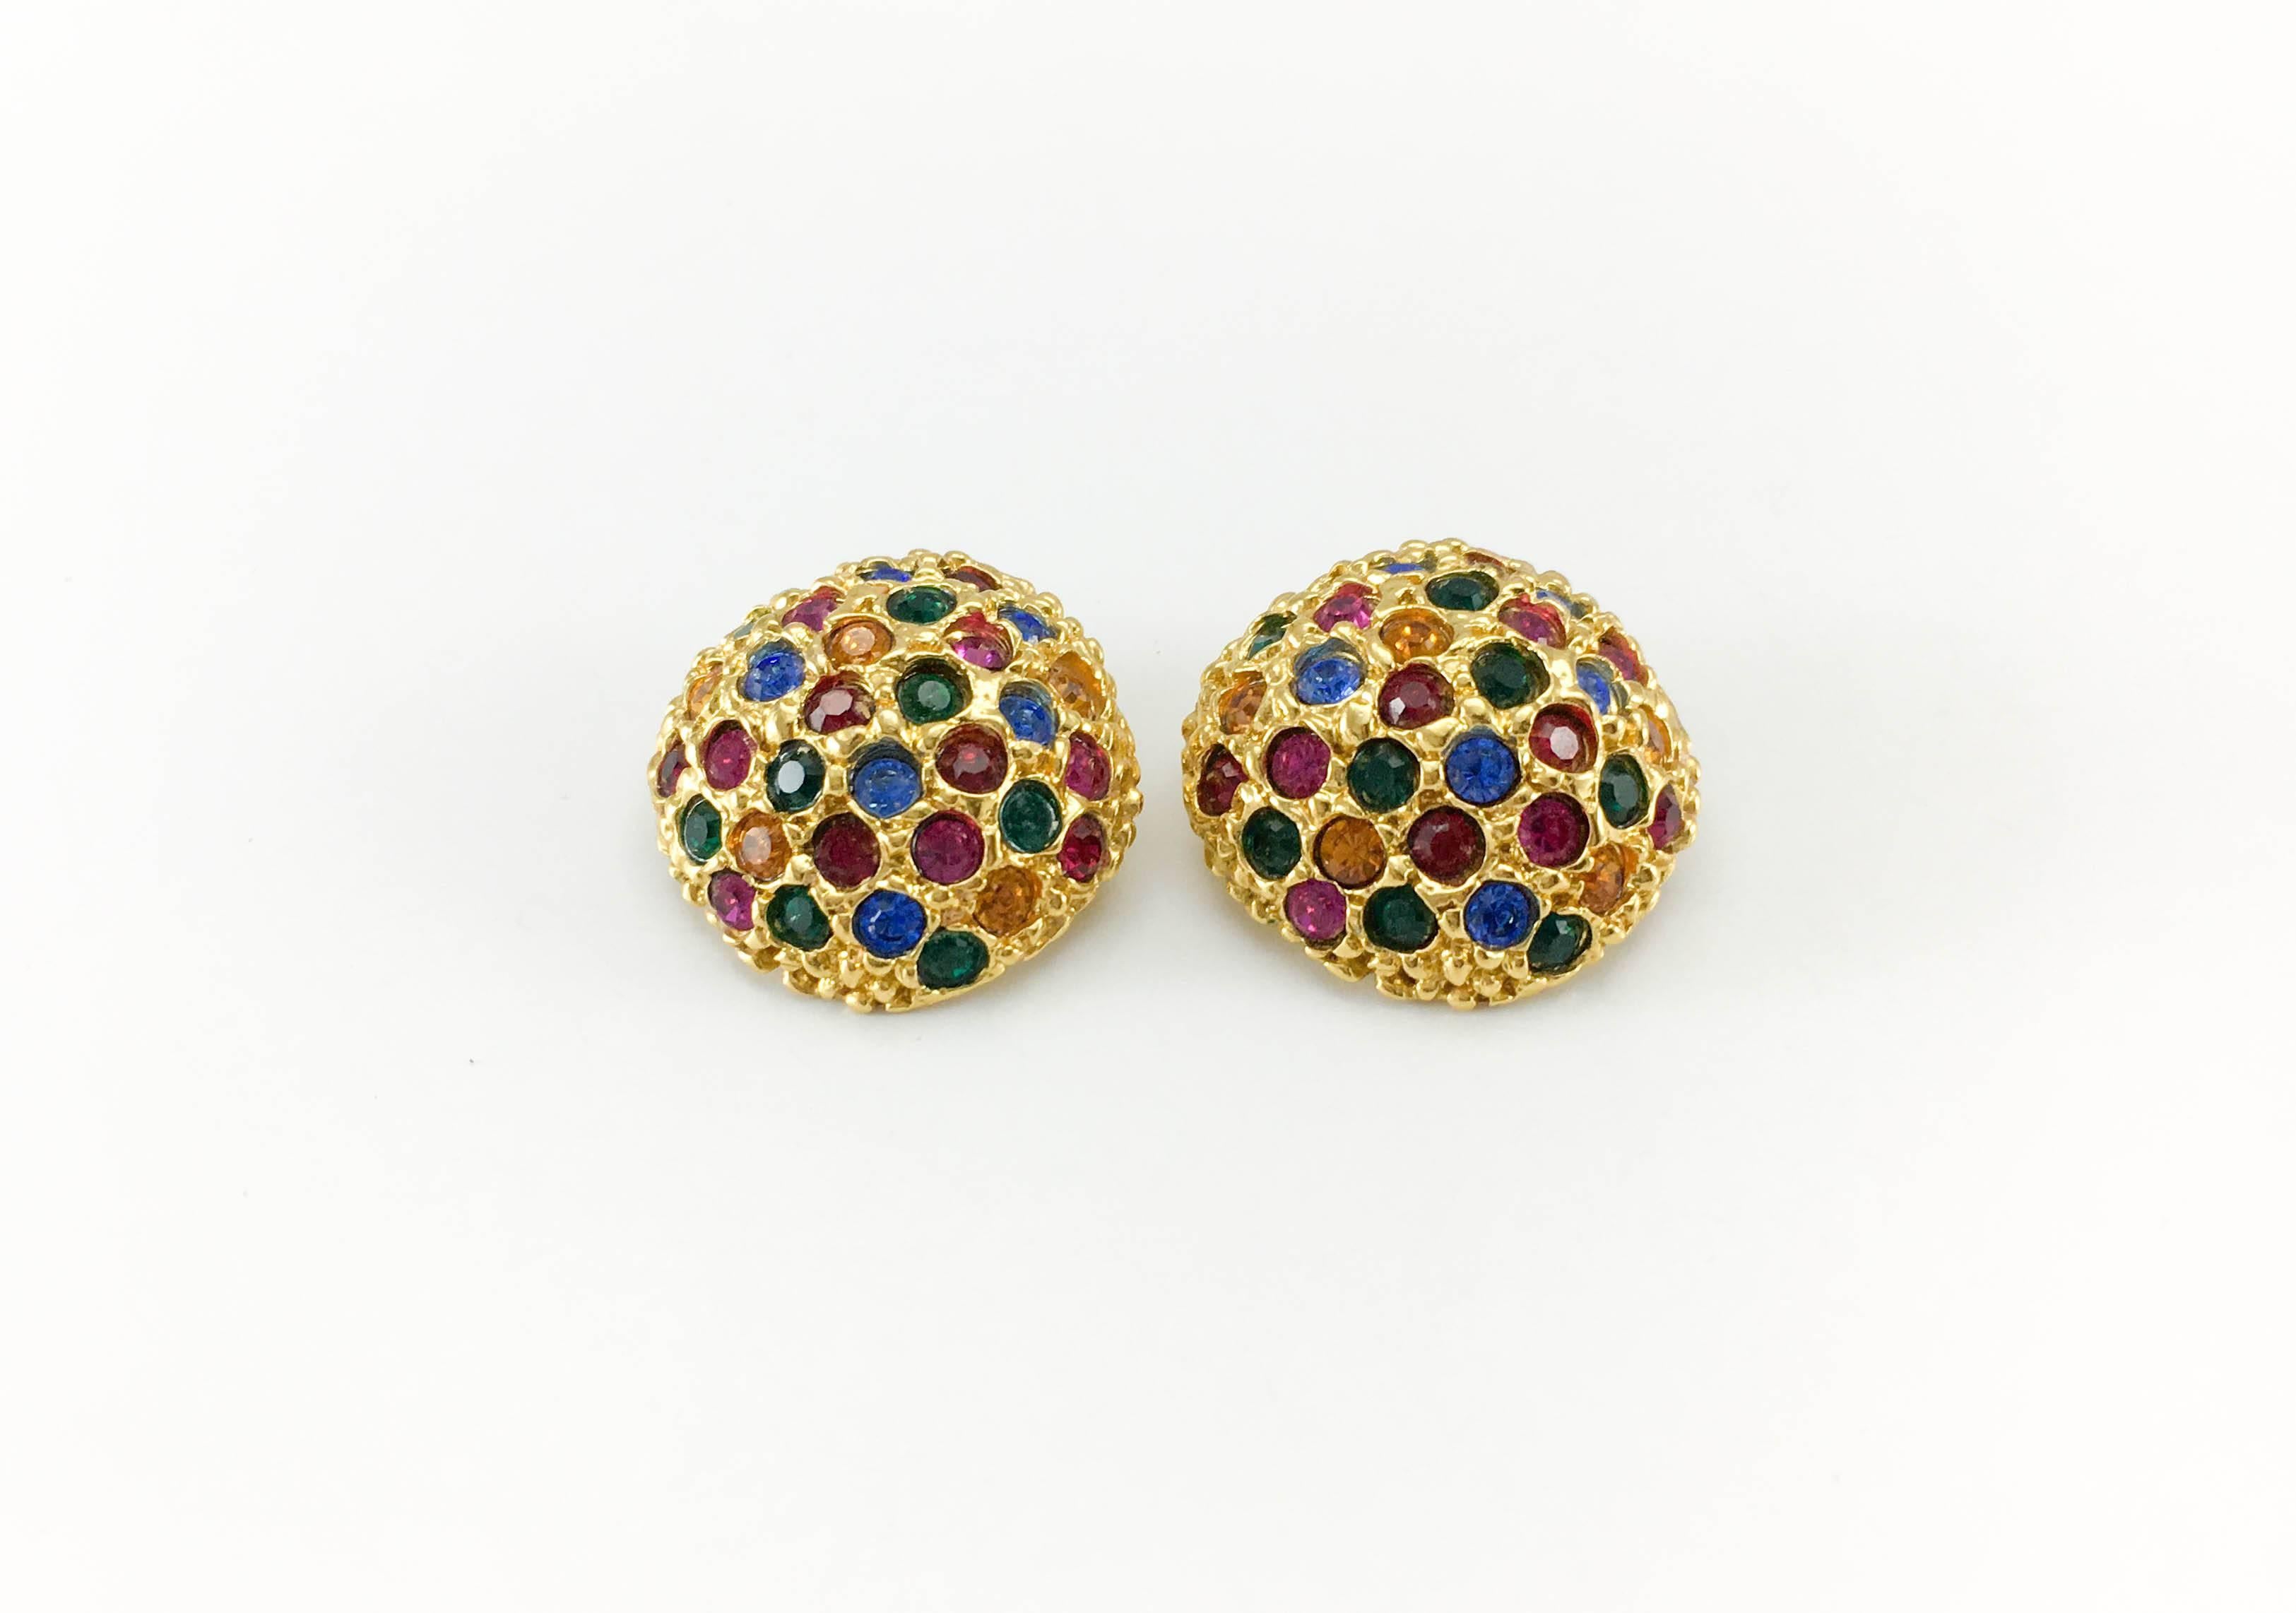 1980s Yves Saint Laurent Colourful Crystal Embellished Gold-Plated Earrings In Excellent Condition In London, Chelsea